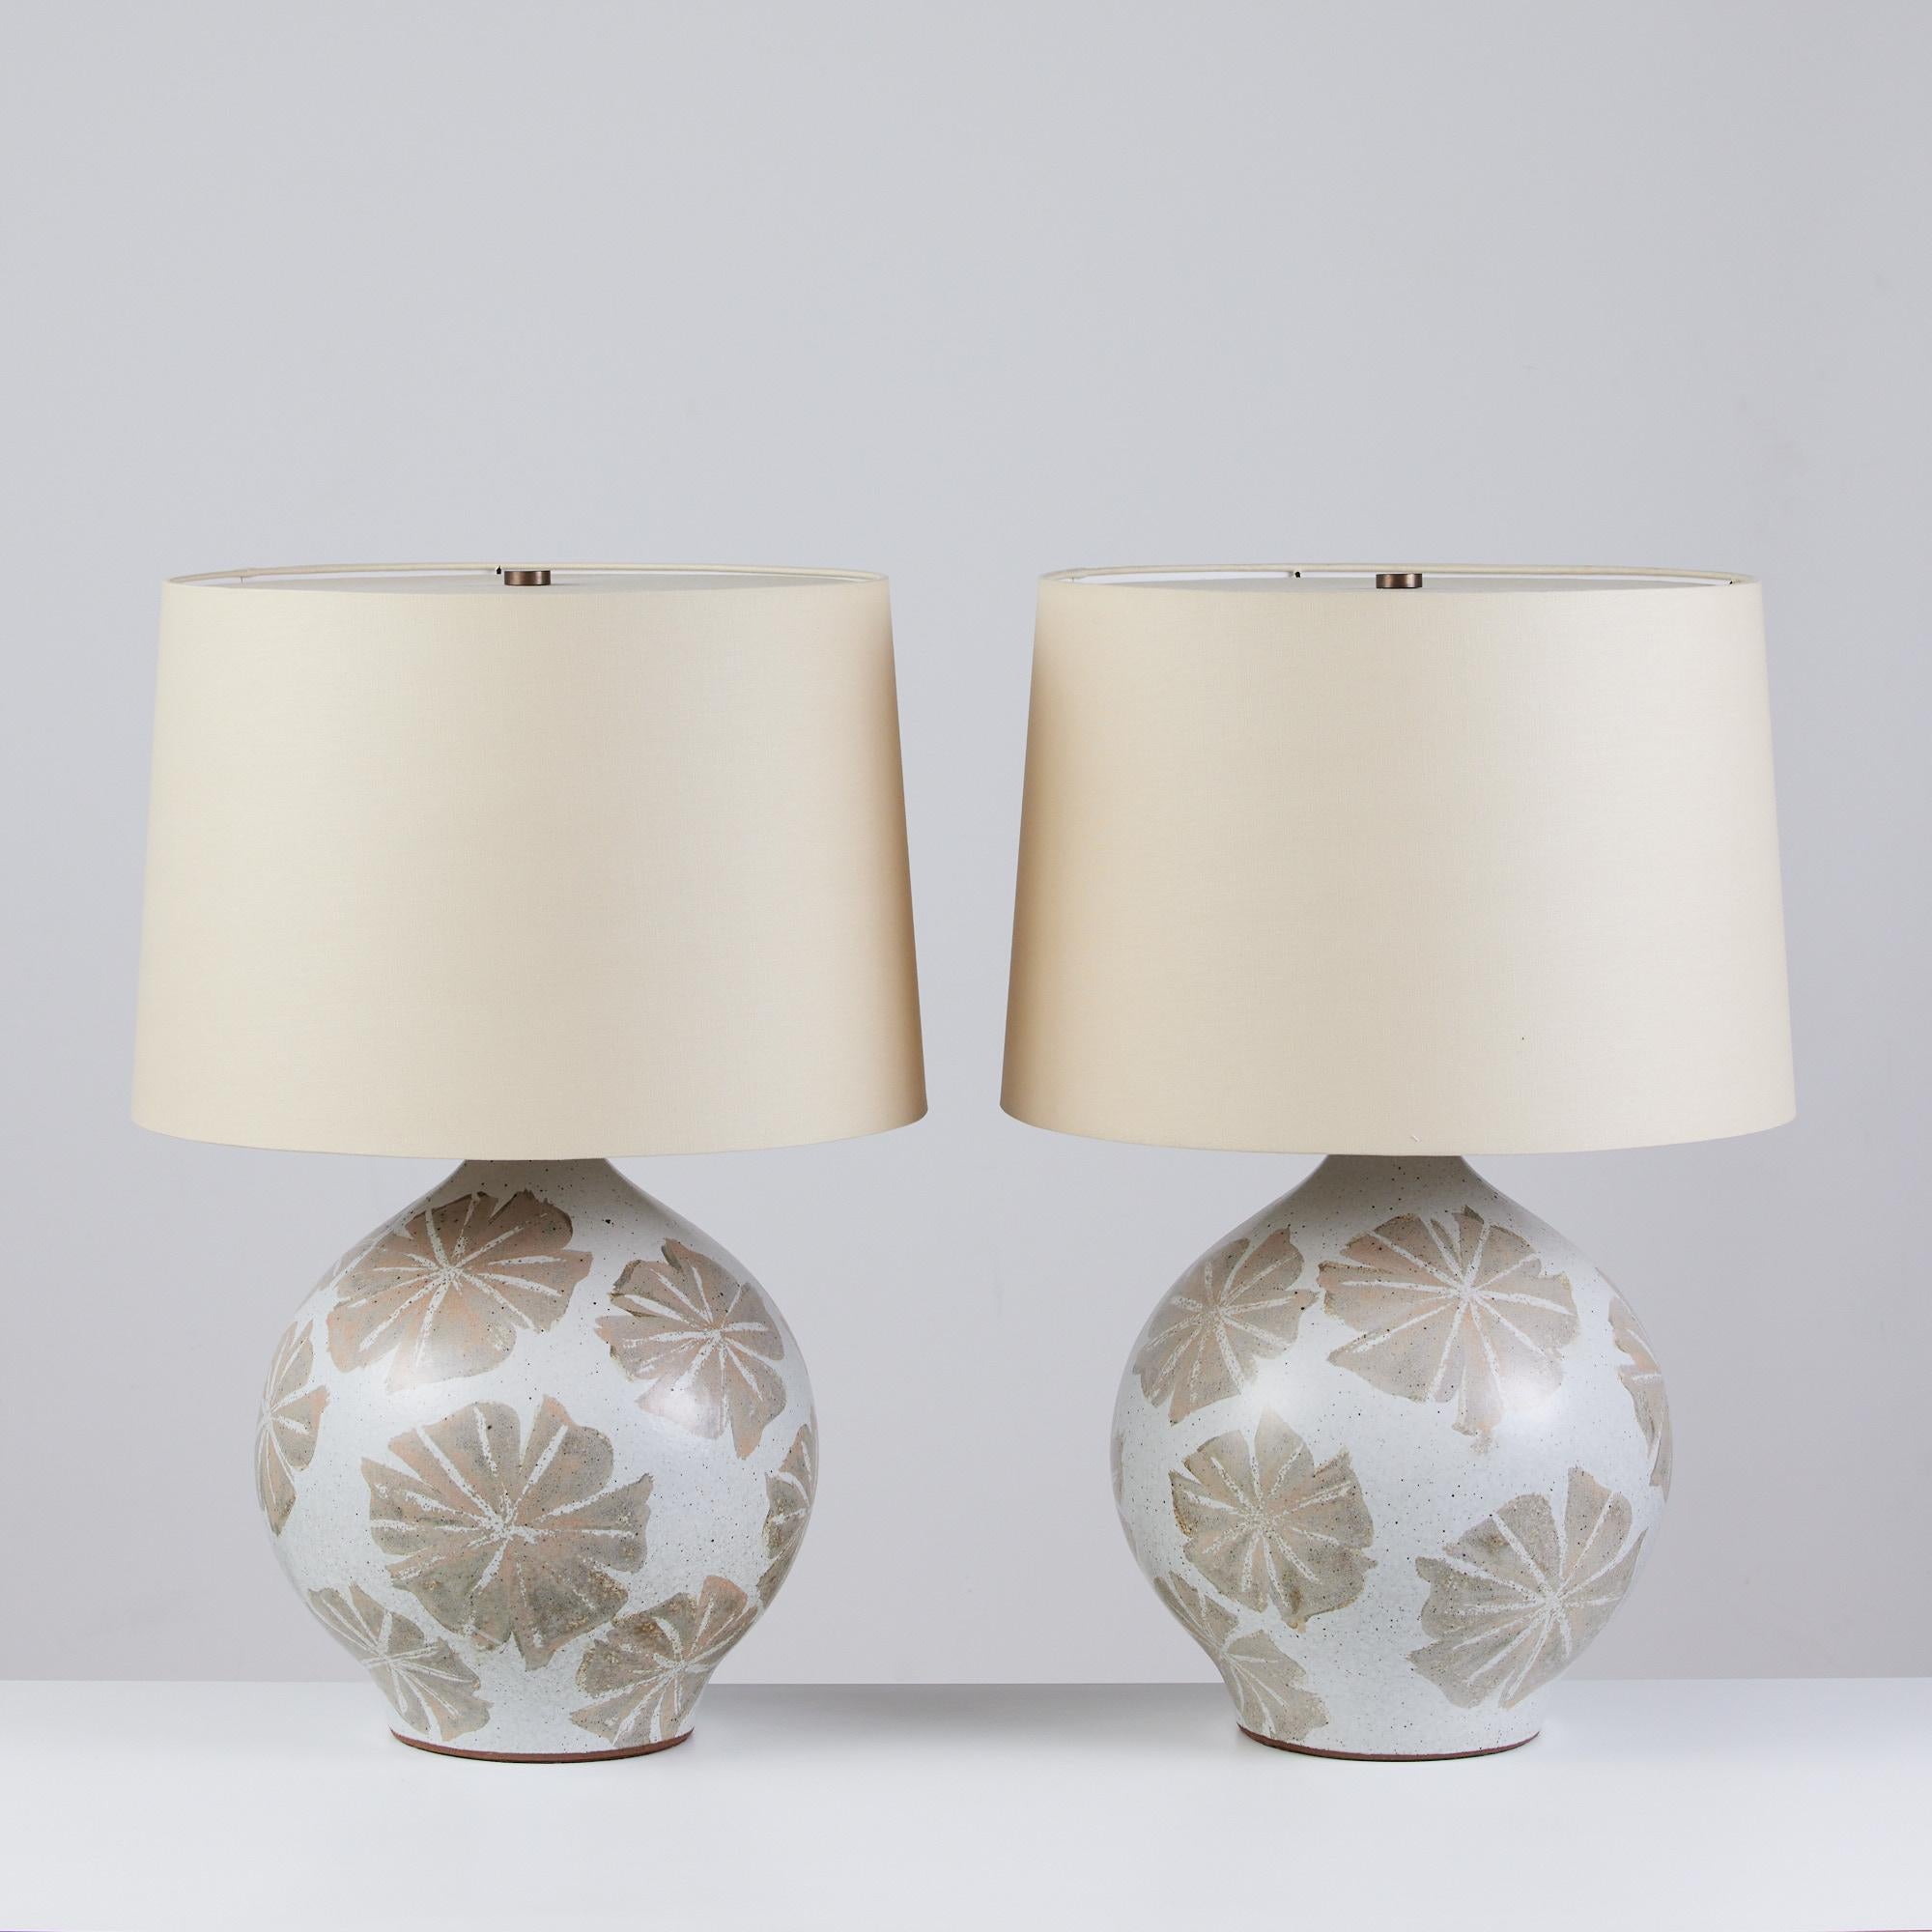 Pair of David Cressey Ceramic Lamps, USA, c.1960s. The wheel thrown ceramic lamps feature a speckled grayish blue colored glaze with applied floral detailing in a brown-gray tone. The newly rewired lamps feature new linen shades. The shades and